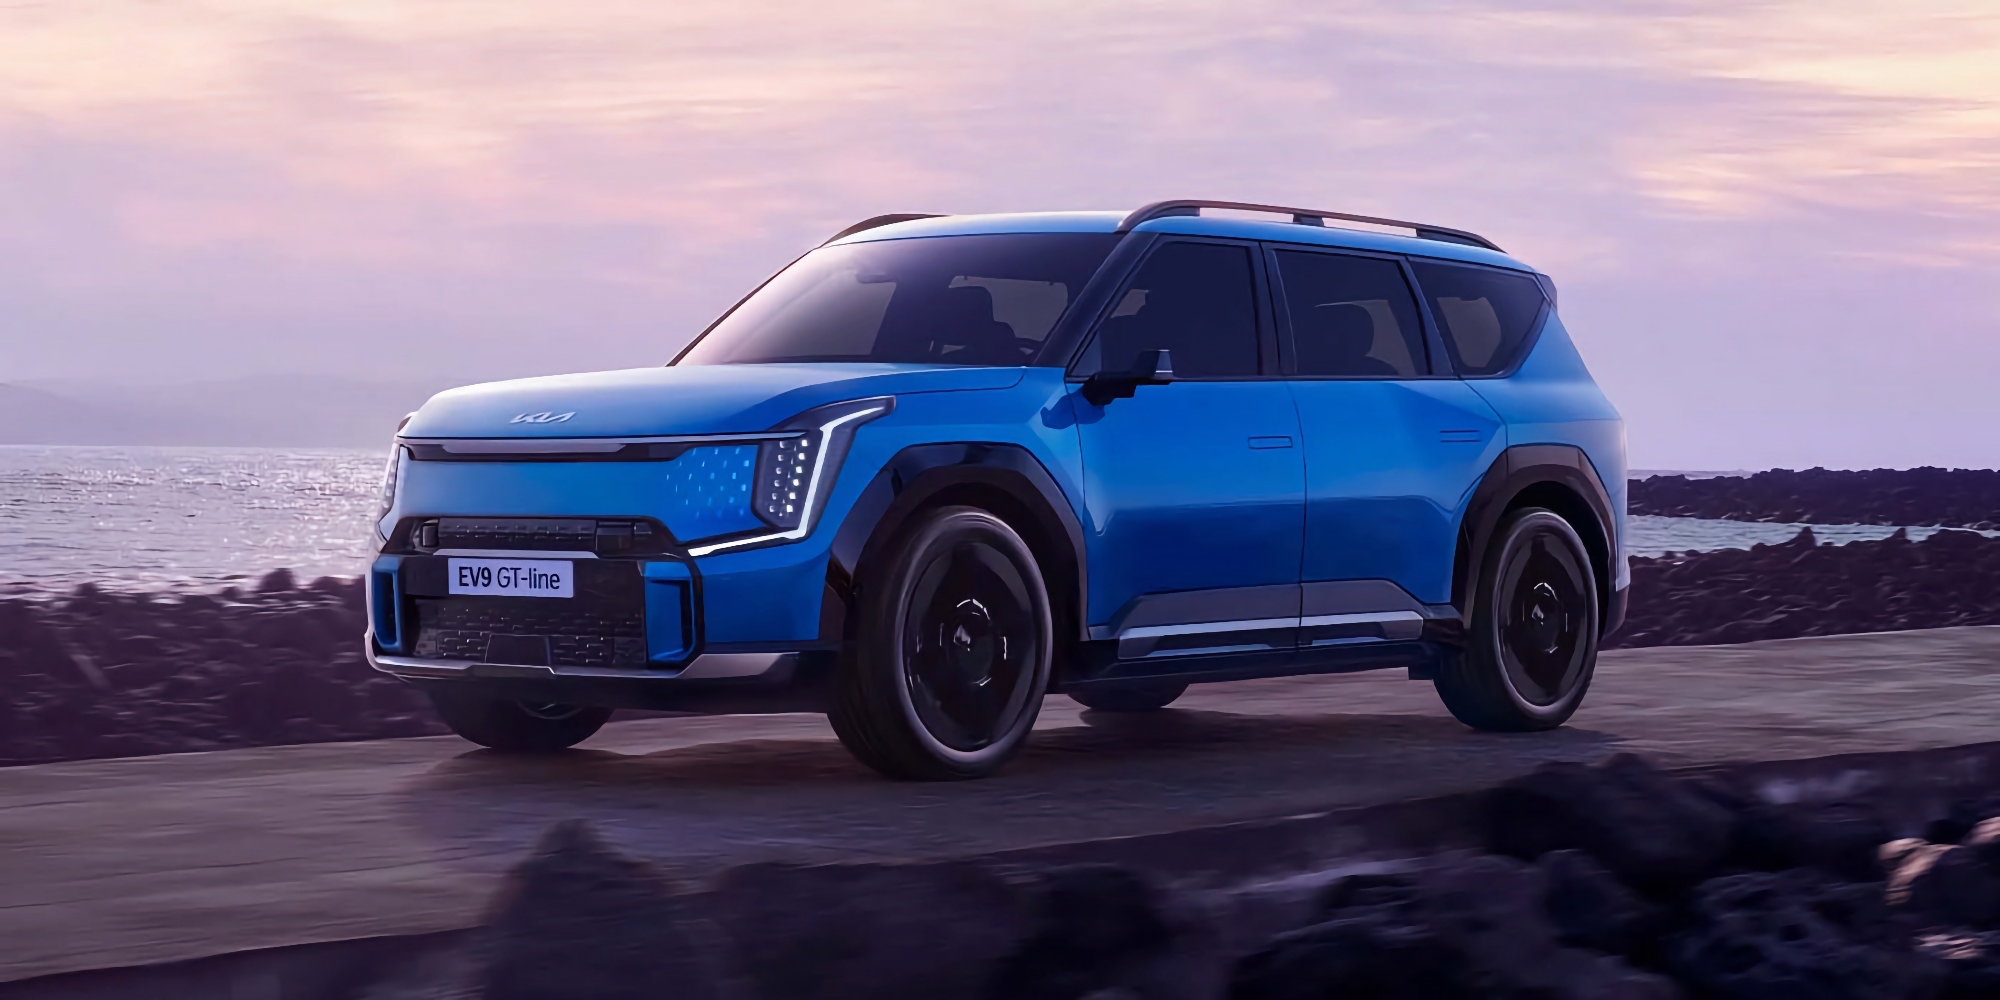 The Kia EV9 electric SUV has learned how to power homes 